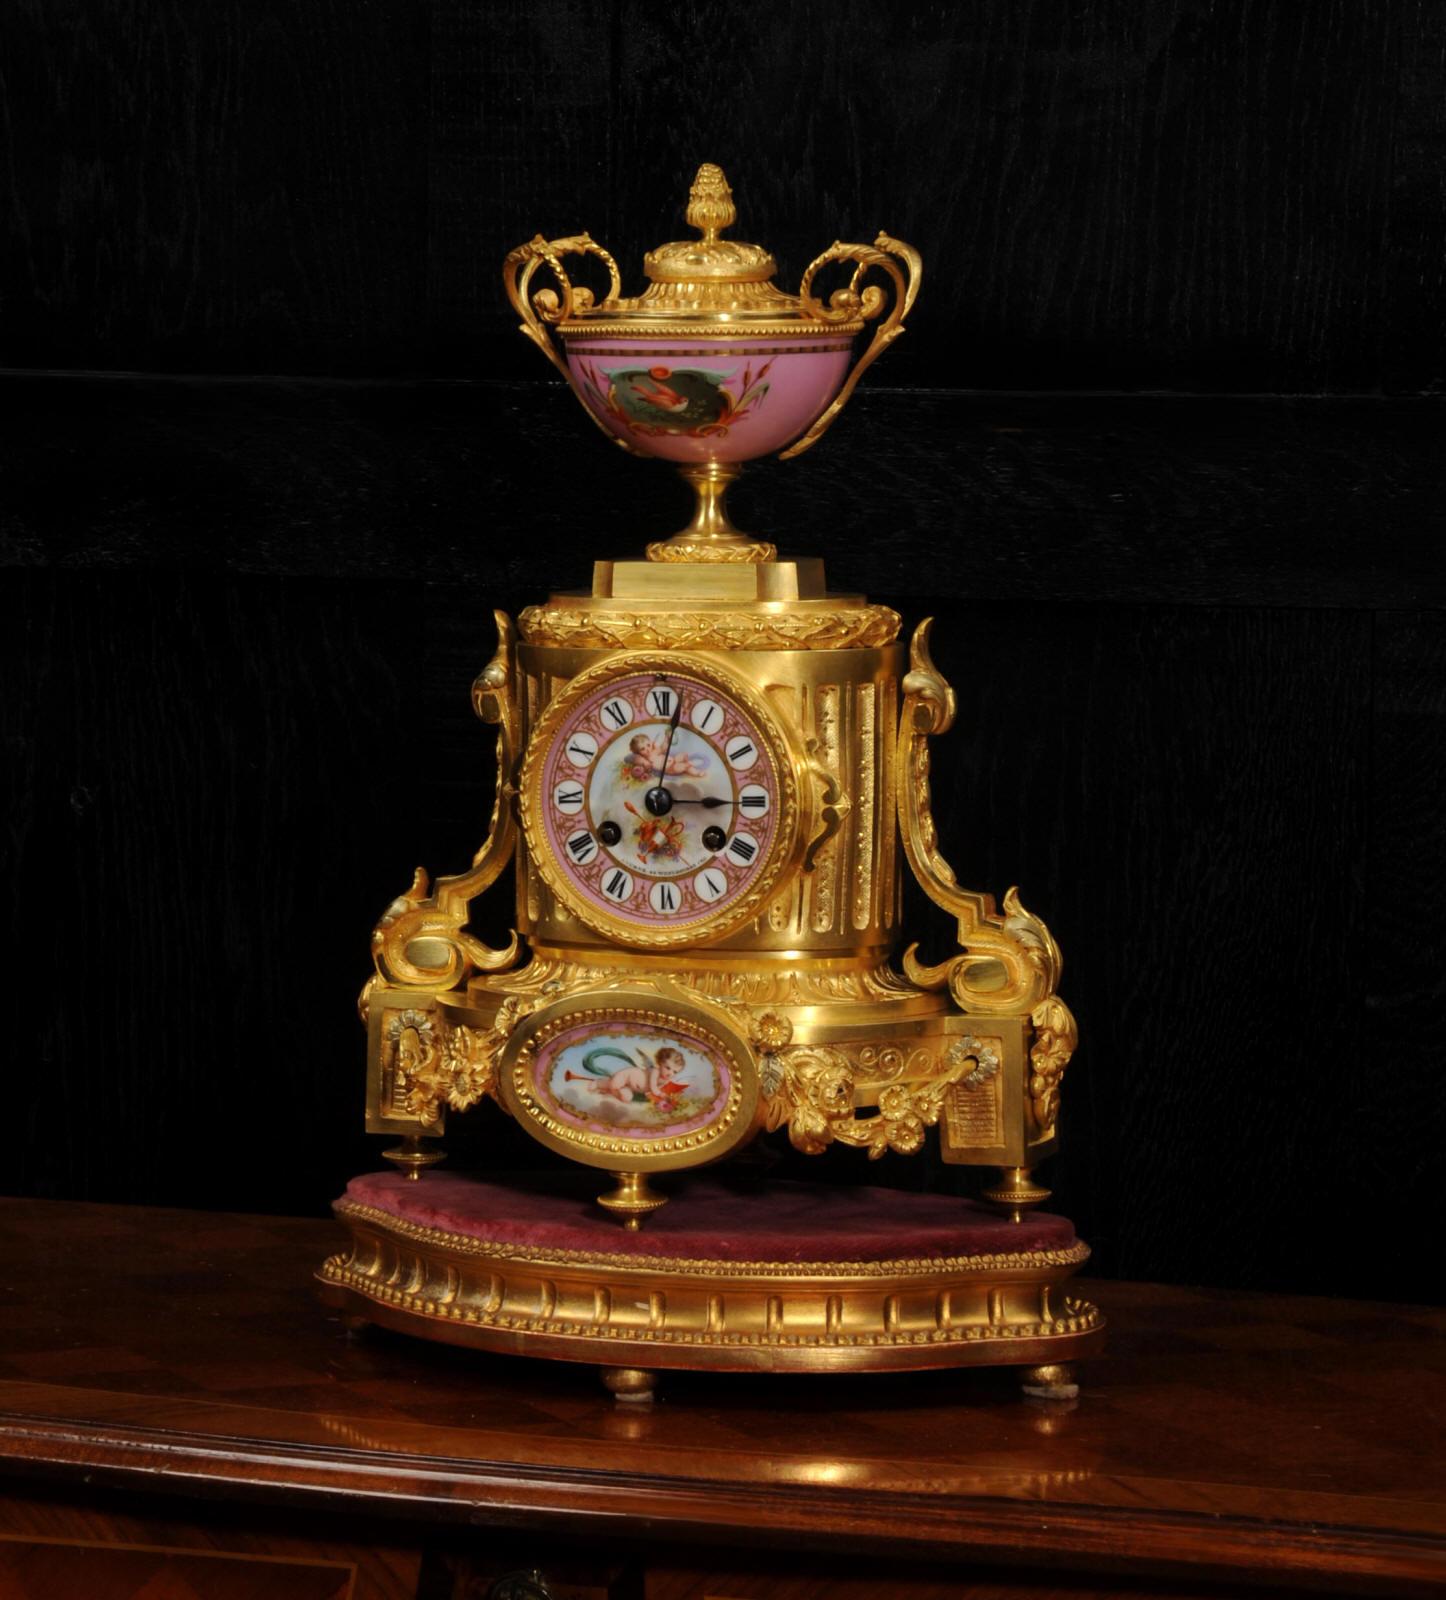 Ormolu and Sevres Porcelain Antique French Clock by Achille Brocot In Good Condition For Sale In Belper, Derbyshire